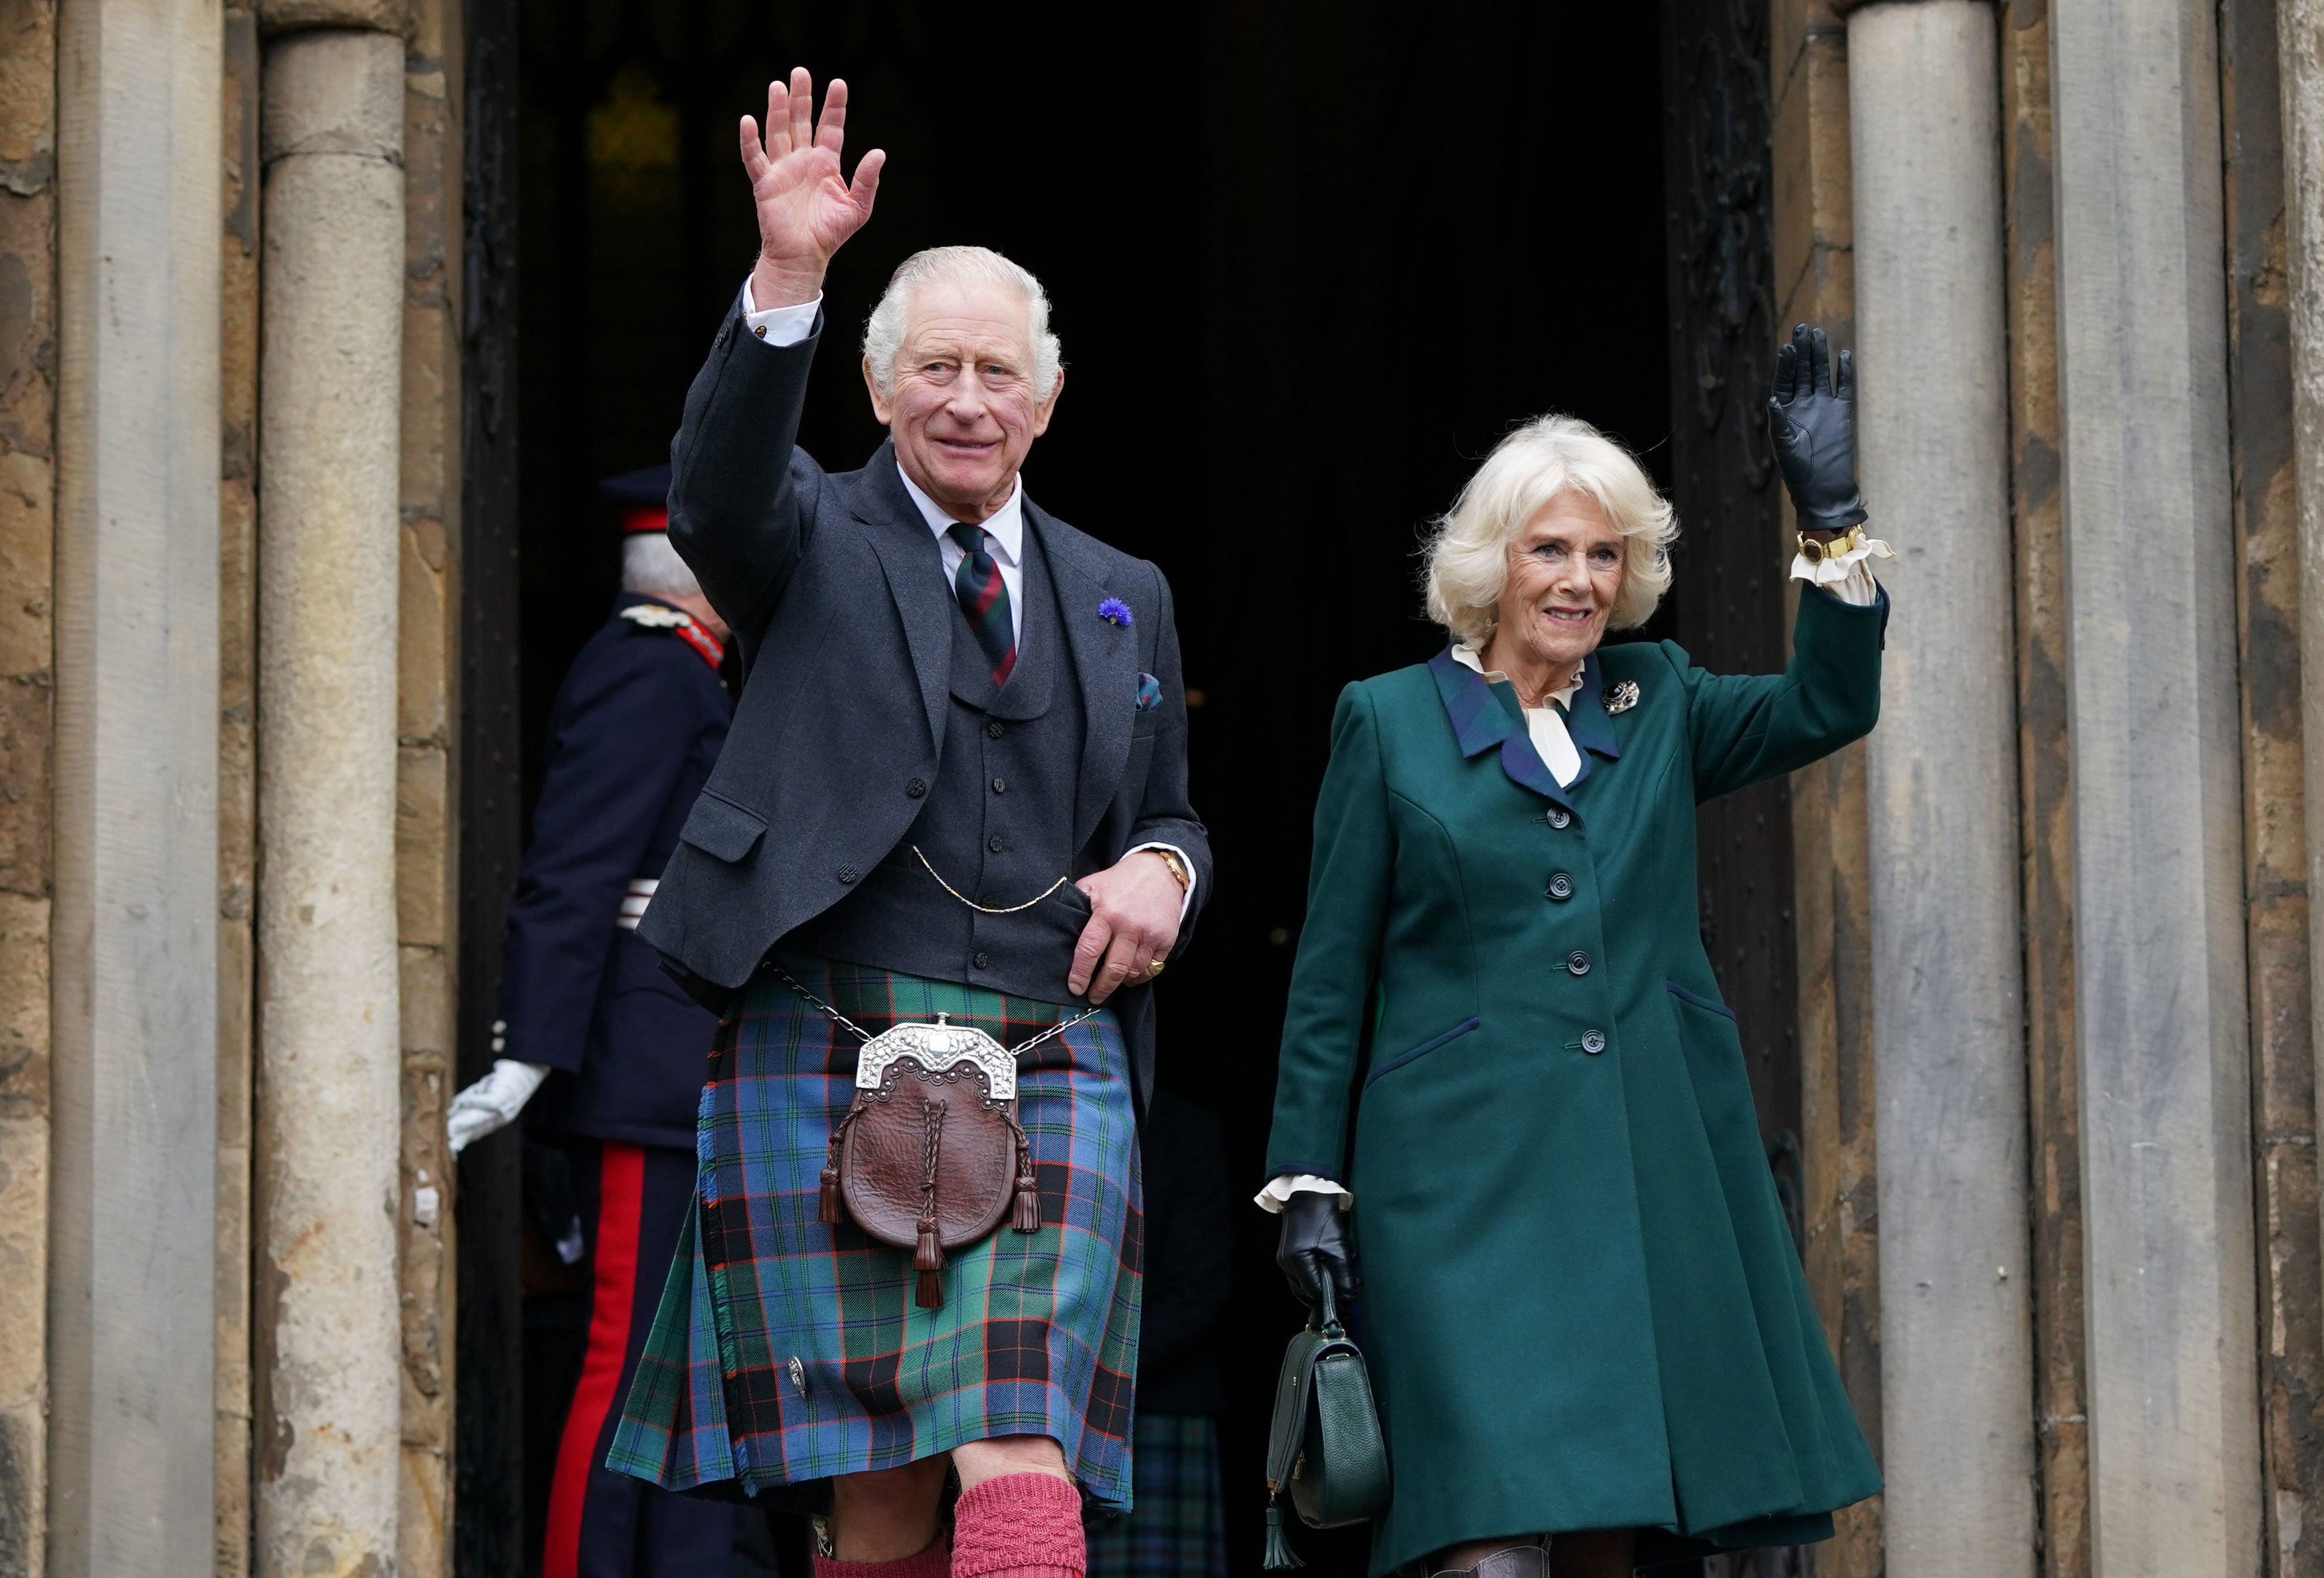 King Charles III and Camilla, queen consort arrive in Dunfermline, Scotland